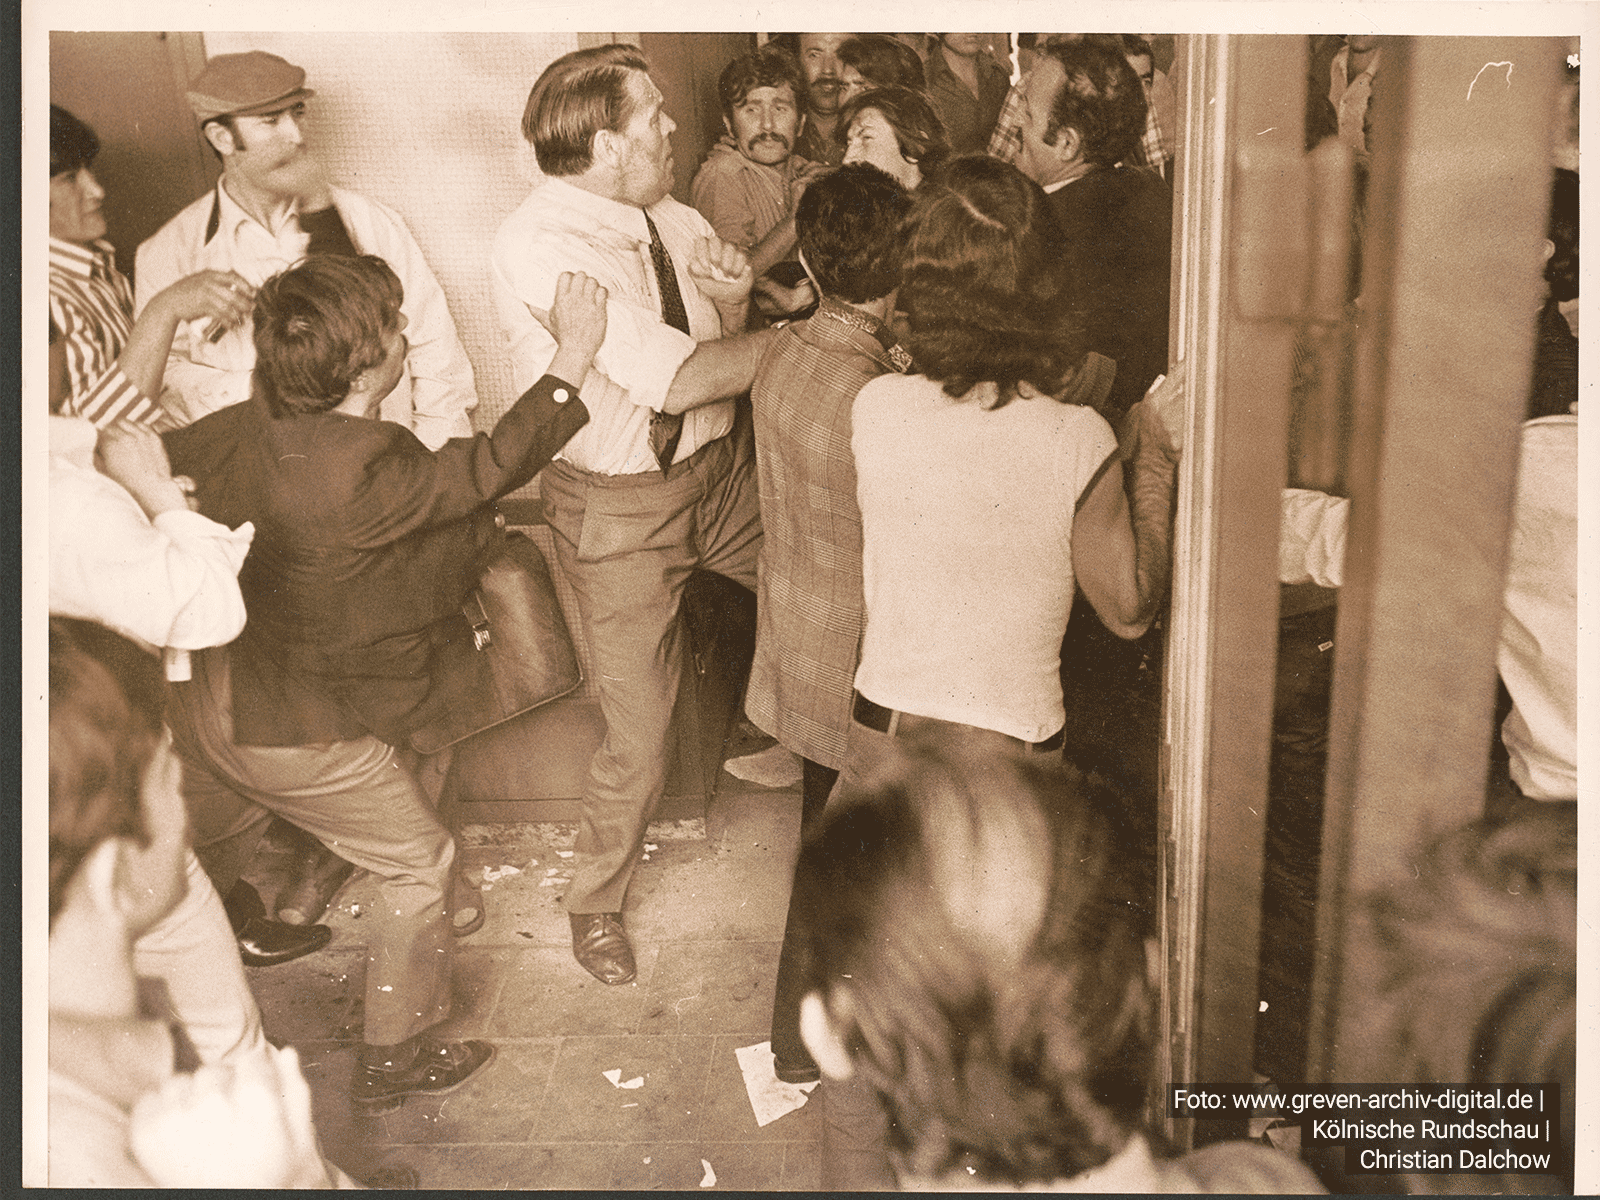 During the "wildcat" strike at Ford, the peace obligation was not observed. Clashes broke out between the migrant workers, the plant security and the police. Photo from 28.08.1973, Photo: www.greven-archiv-digital.de | Kölnische Rundschau | Christian Dalchow